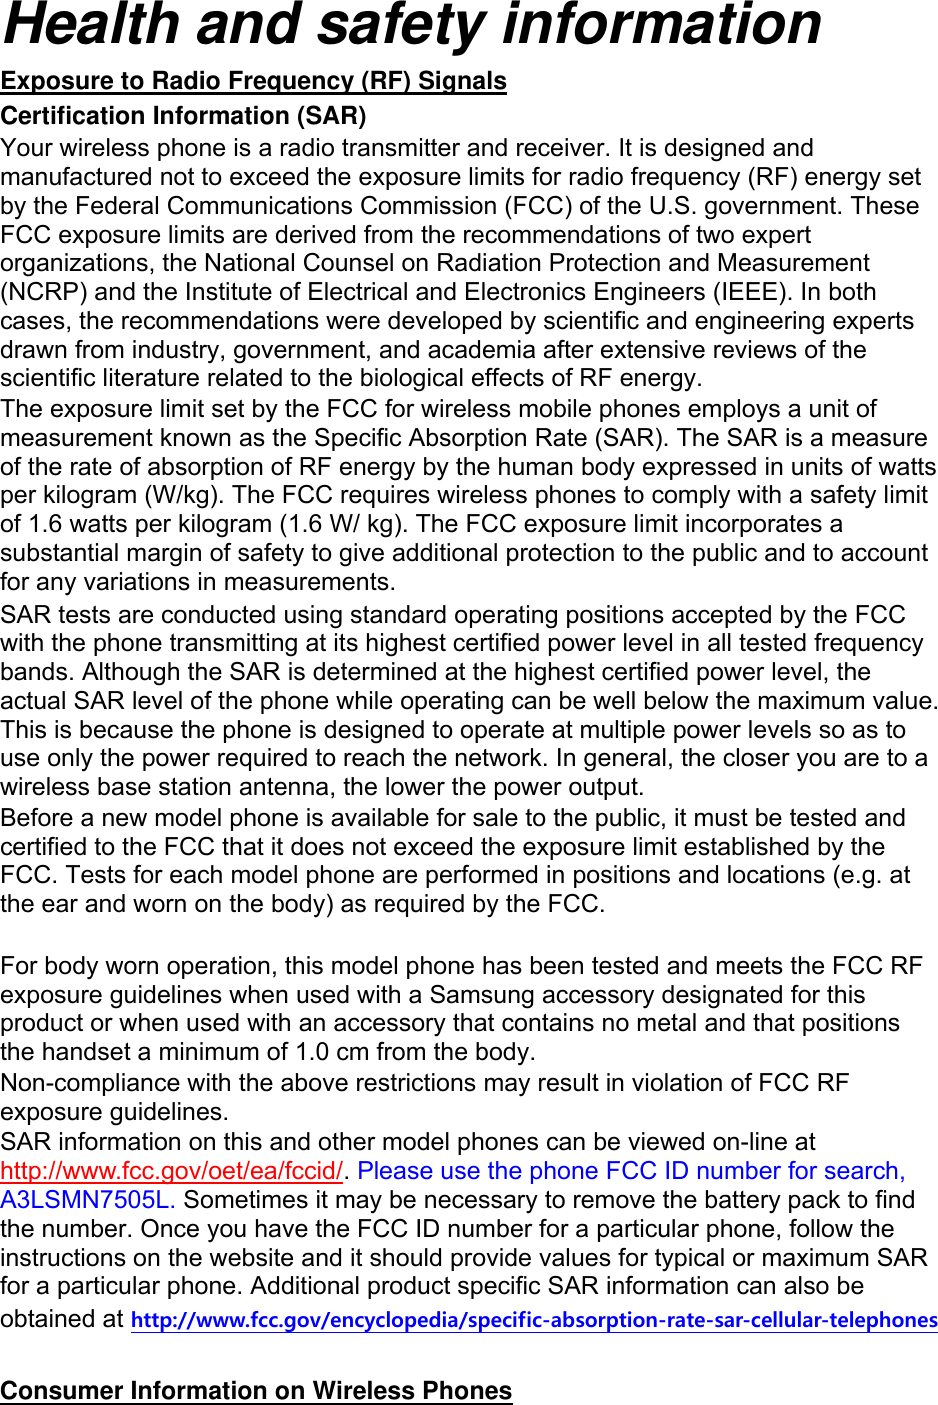 Health and safety information Exposure to Radio Frequency (RF) Signals Certification Information (SAR) Your wireless phone is a radio transmitter and receiver. It is designed and manufactured not to exceed the exposure limits for radio frequency (RF) energy set by the Federal Communications Commission (FCC) of the U.S. government. These FCC exposure limits are derived from the recommendations of two expert organizations, the National Counsel on Radiation Protection and Measurement (NCRP) and the Institute of Electrical and Electronics Engineers (IEEE). In both cases, the recommendations were developed by scientific and engineering experts drawn from industry, government, and academia after extensive reviews of the scientific literature related to the biological effects of RF energy. The exposure limit set by the FCC for wireless mobile phones employs a unit of measurement known as the Specific Absorption Rate (SAR). The SAR is a measure of the rate of absorption of RF energy by the human body expressed in units of watts per kilogram (W/kg). The FCC requires wireless phones to comply with a safety limit of 1.6 watts per kilogram (1.6 W/ kg). The FCC exposure limit incorporates a substantial margin of safety to give additional protection to the public and to account for any variations in measurements. SAR tests are conducted using standard operating positions accepted by the FCC with the phone transmitting at its highest certified power level in all tested frequency bands. Although the SAR is determined at the highest certified power level, the actual SAR level of the phone while operating can be well below the maximum value. This is because the phone is designed to operate at multiple power levels so as to use only the power required to reach the network. In general, the closer you are to a wireless base station antenna, the lower the power output. Before a new model phone is available for sale to the public, it must be tested and certified to the FCC that it does not exceed the exposure limit established by the FCC. Tests for each model phone are performed in positions and locations (e.g. at the ear and worn on the body) as required by the FCC.      For body worn operation, this model phone has been tested and meets the FCC RF exposure guidelines when used with a Samsung accessory designated for this product or when used with an accessory that contains no metal and that positions the handset a minimum of 1.0 cm from the body.   Non-compliance with the above restrictions may result in violation of FCC RF exposure guidelines. SAR information on this and other model phones can be viewed on-line at http://www.fcc.gov/oet/ea/fccid/. Please use the phone FCC ID number for search, A3LSMN7505L. Sometimes it may be necessary to remove the battery pack to find the number. Once you have the FCC ID number for a particular phone, follow the instructions on the website and it should provide values for typical or maximum SAR for a particular phone. Additional product specific SAR information can also be obtained at http://www.fcc.gov/encyclopedia/specific-absorption-rate-sar-cellular-telephones  Consumer Information on Wireless Phones 